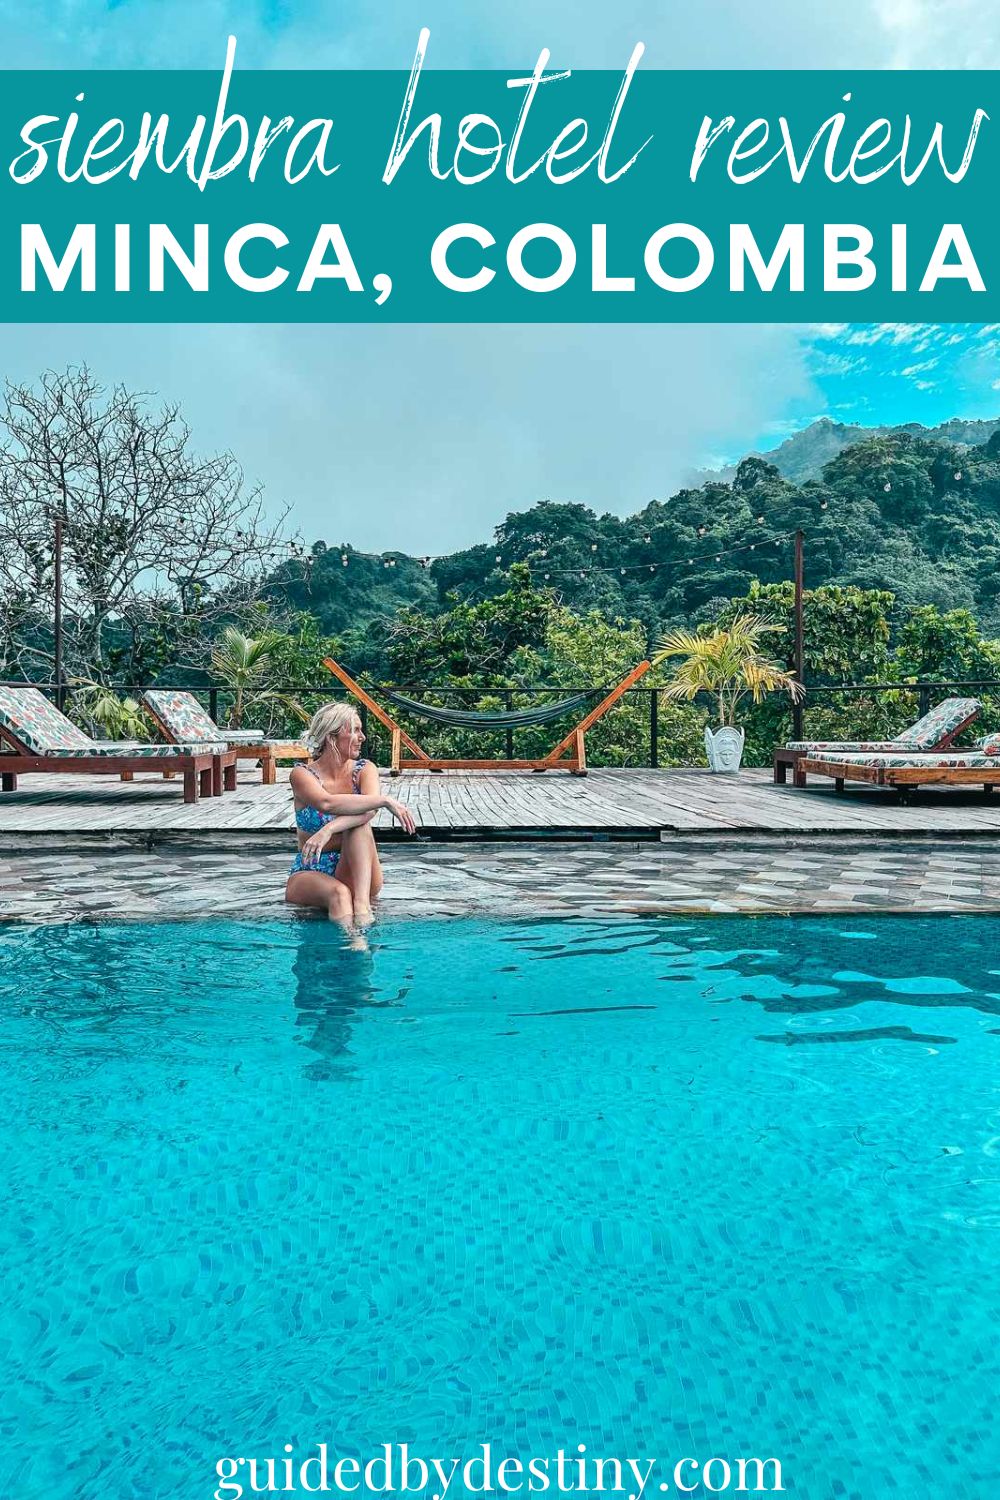 siembra hotel review minca colombia